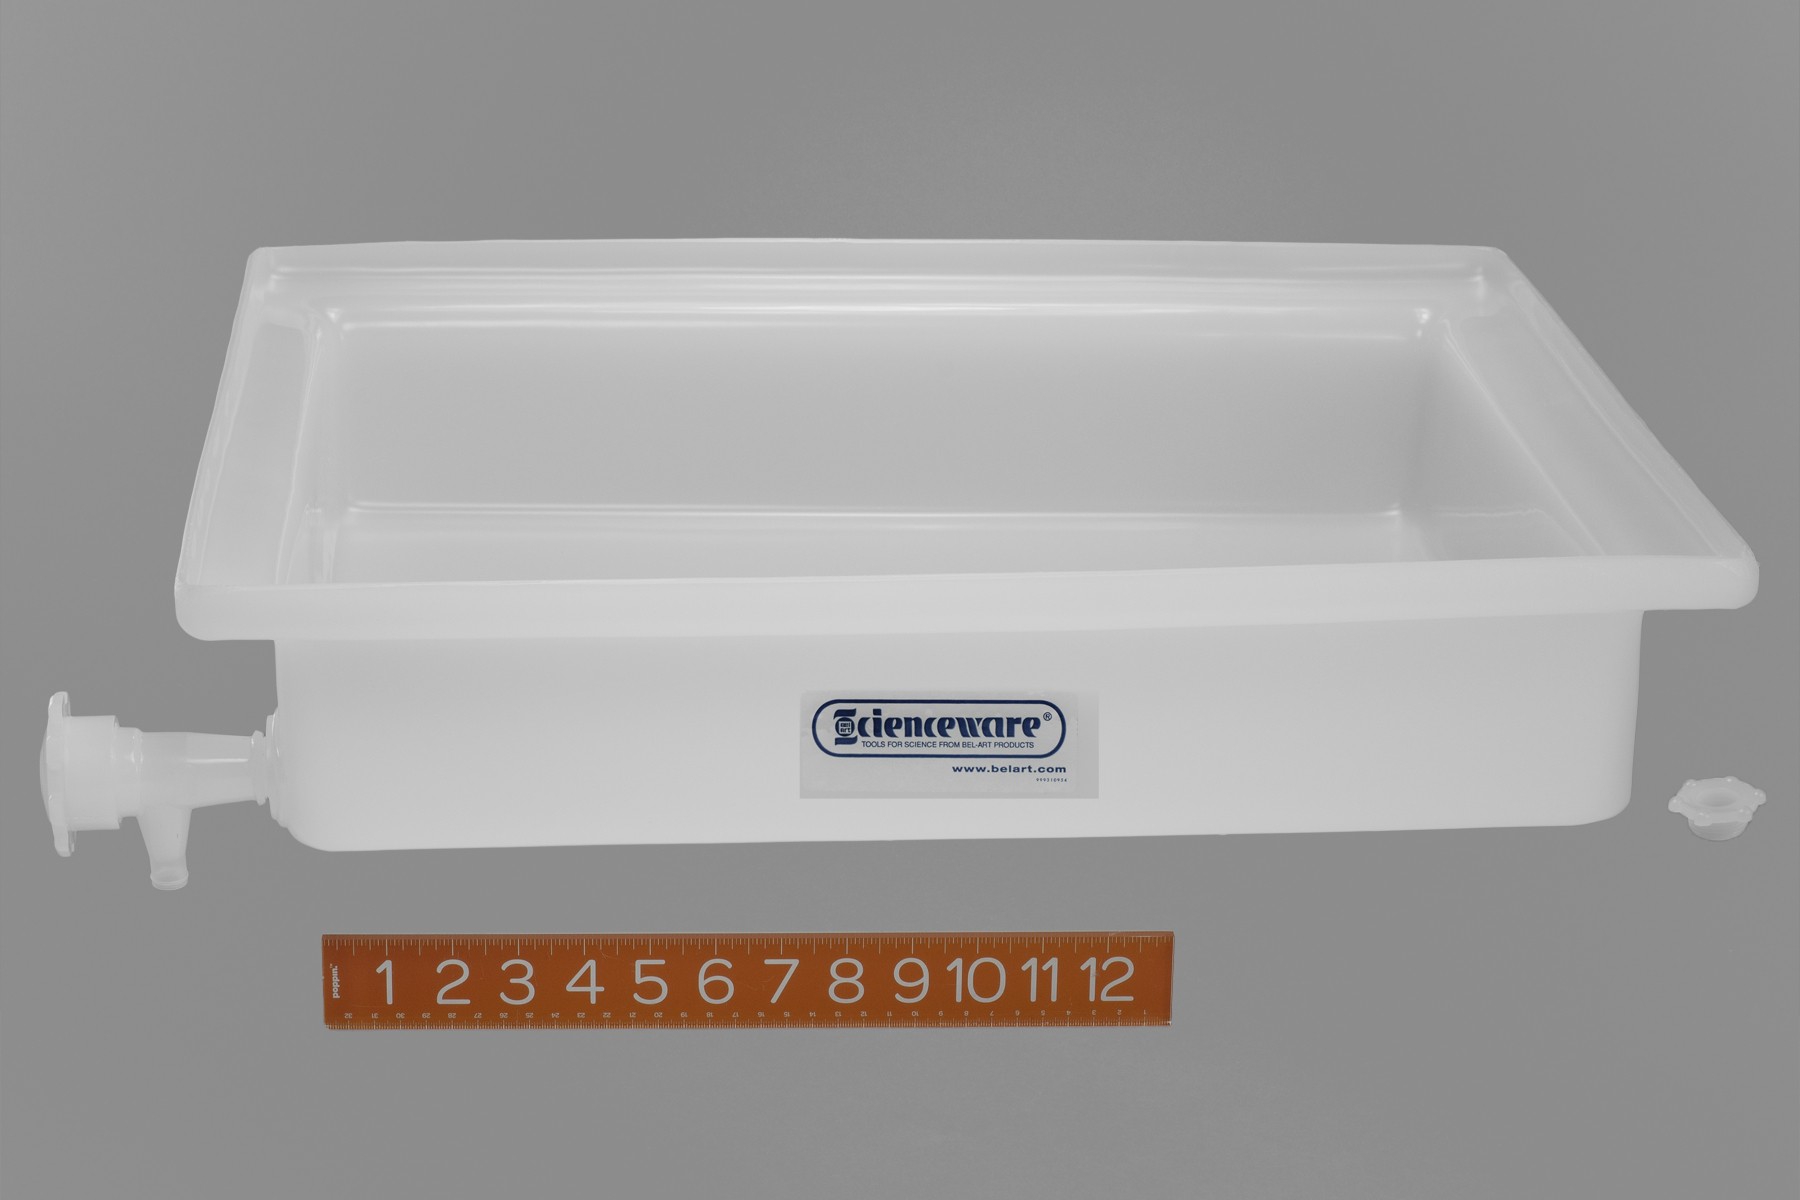 SP Bel-Art General Purpose Polyethylene Tray with Faucet; 18 x 22 x 4 in.